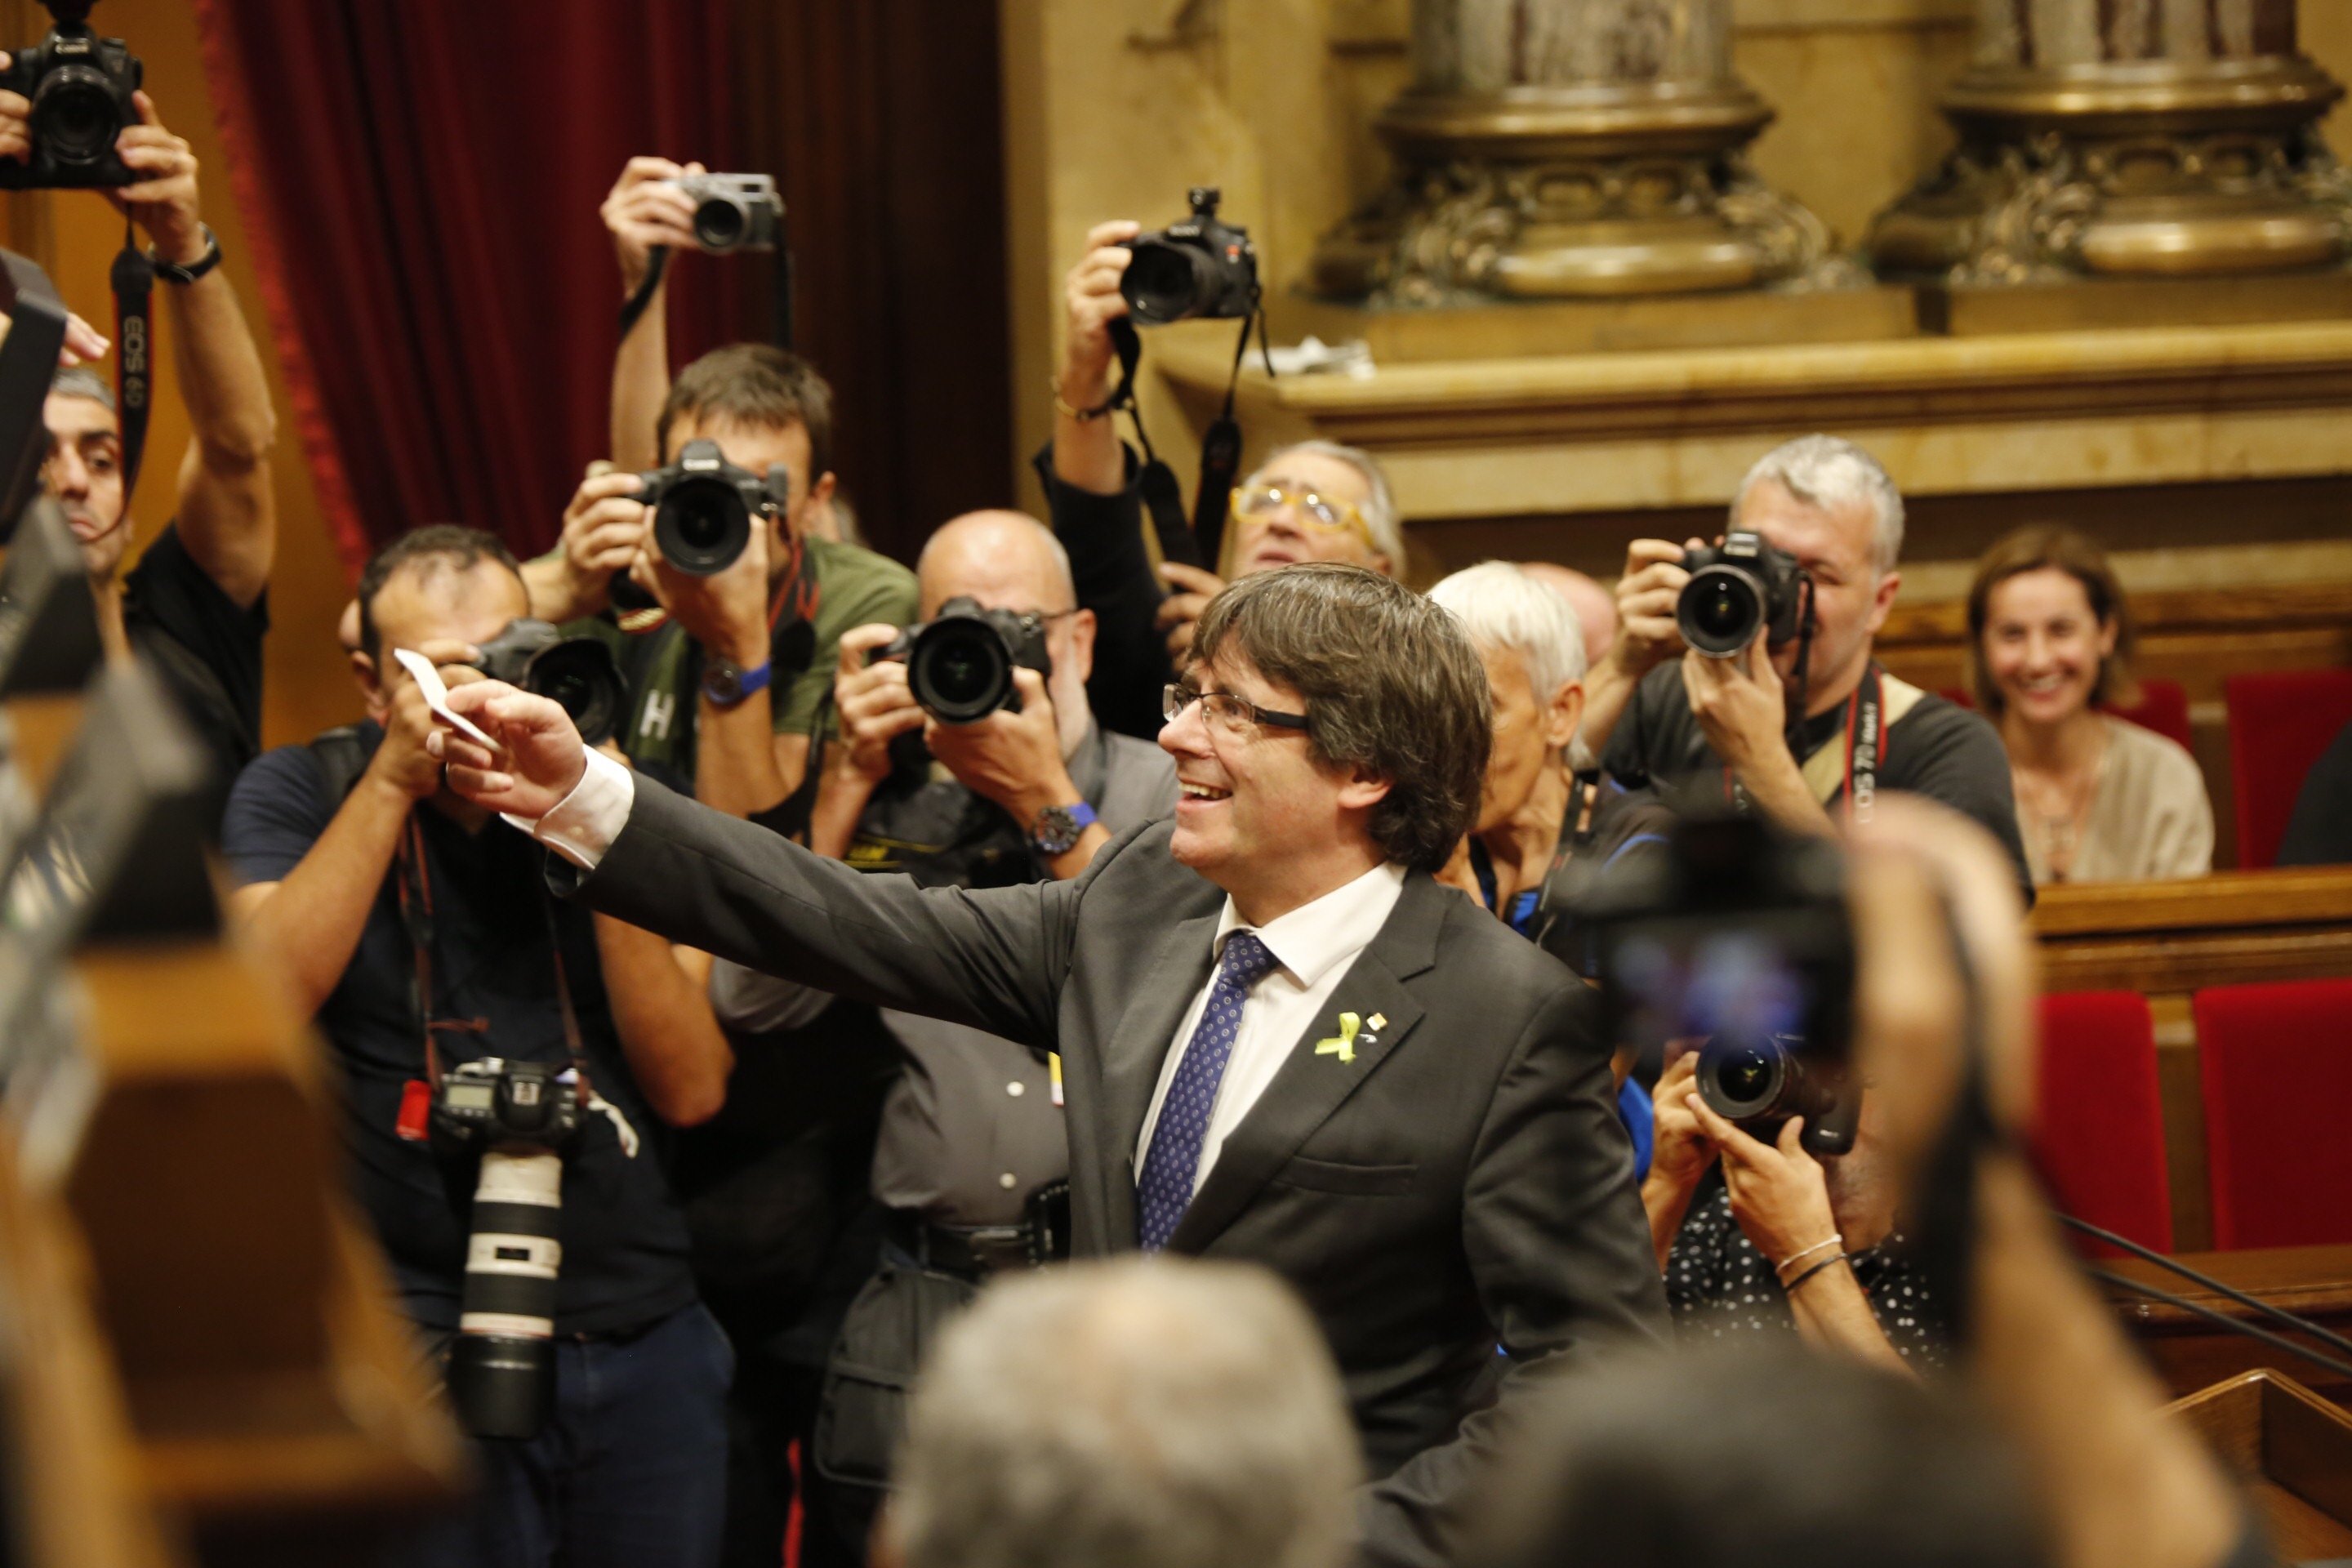 JxCat moots "reinstating" Puigdemont if he's extradited for misuse of funds